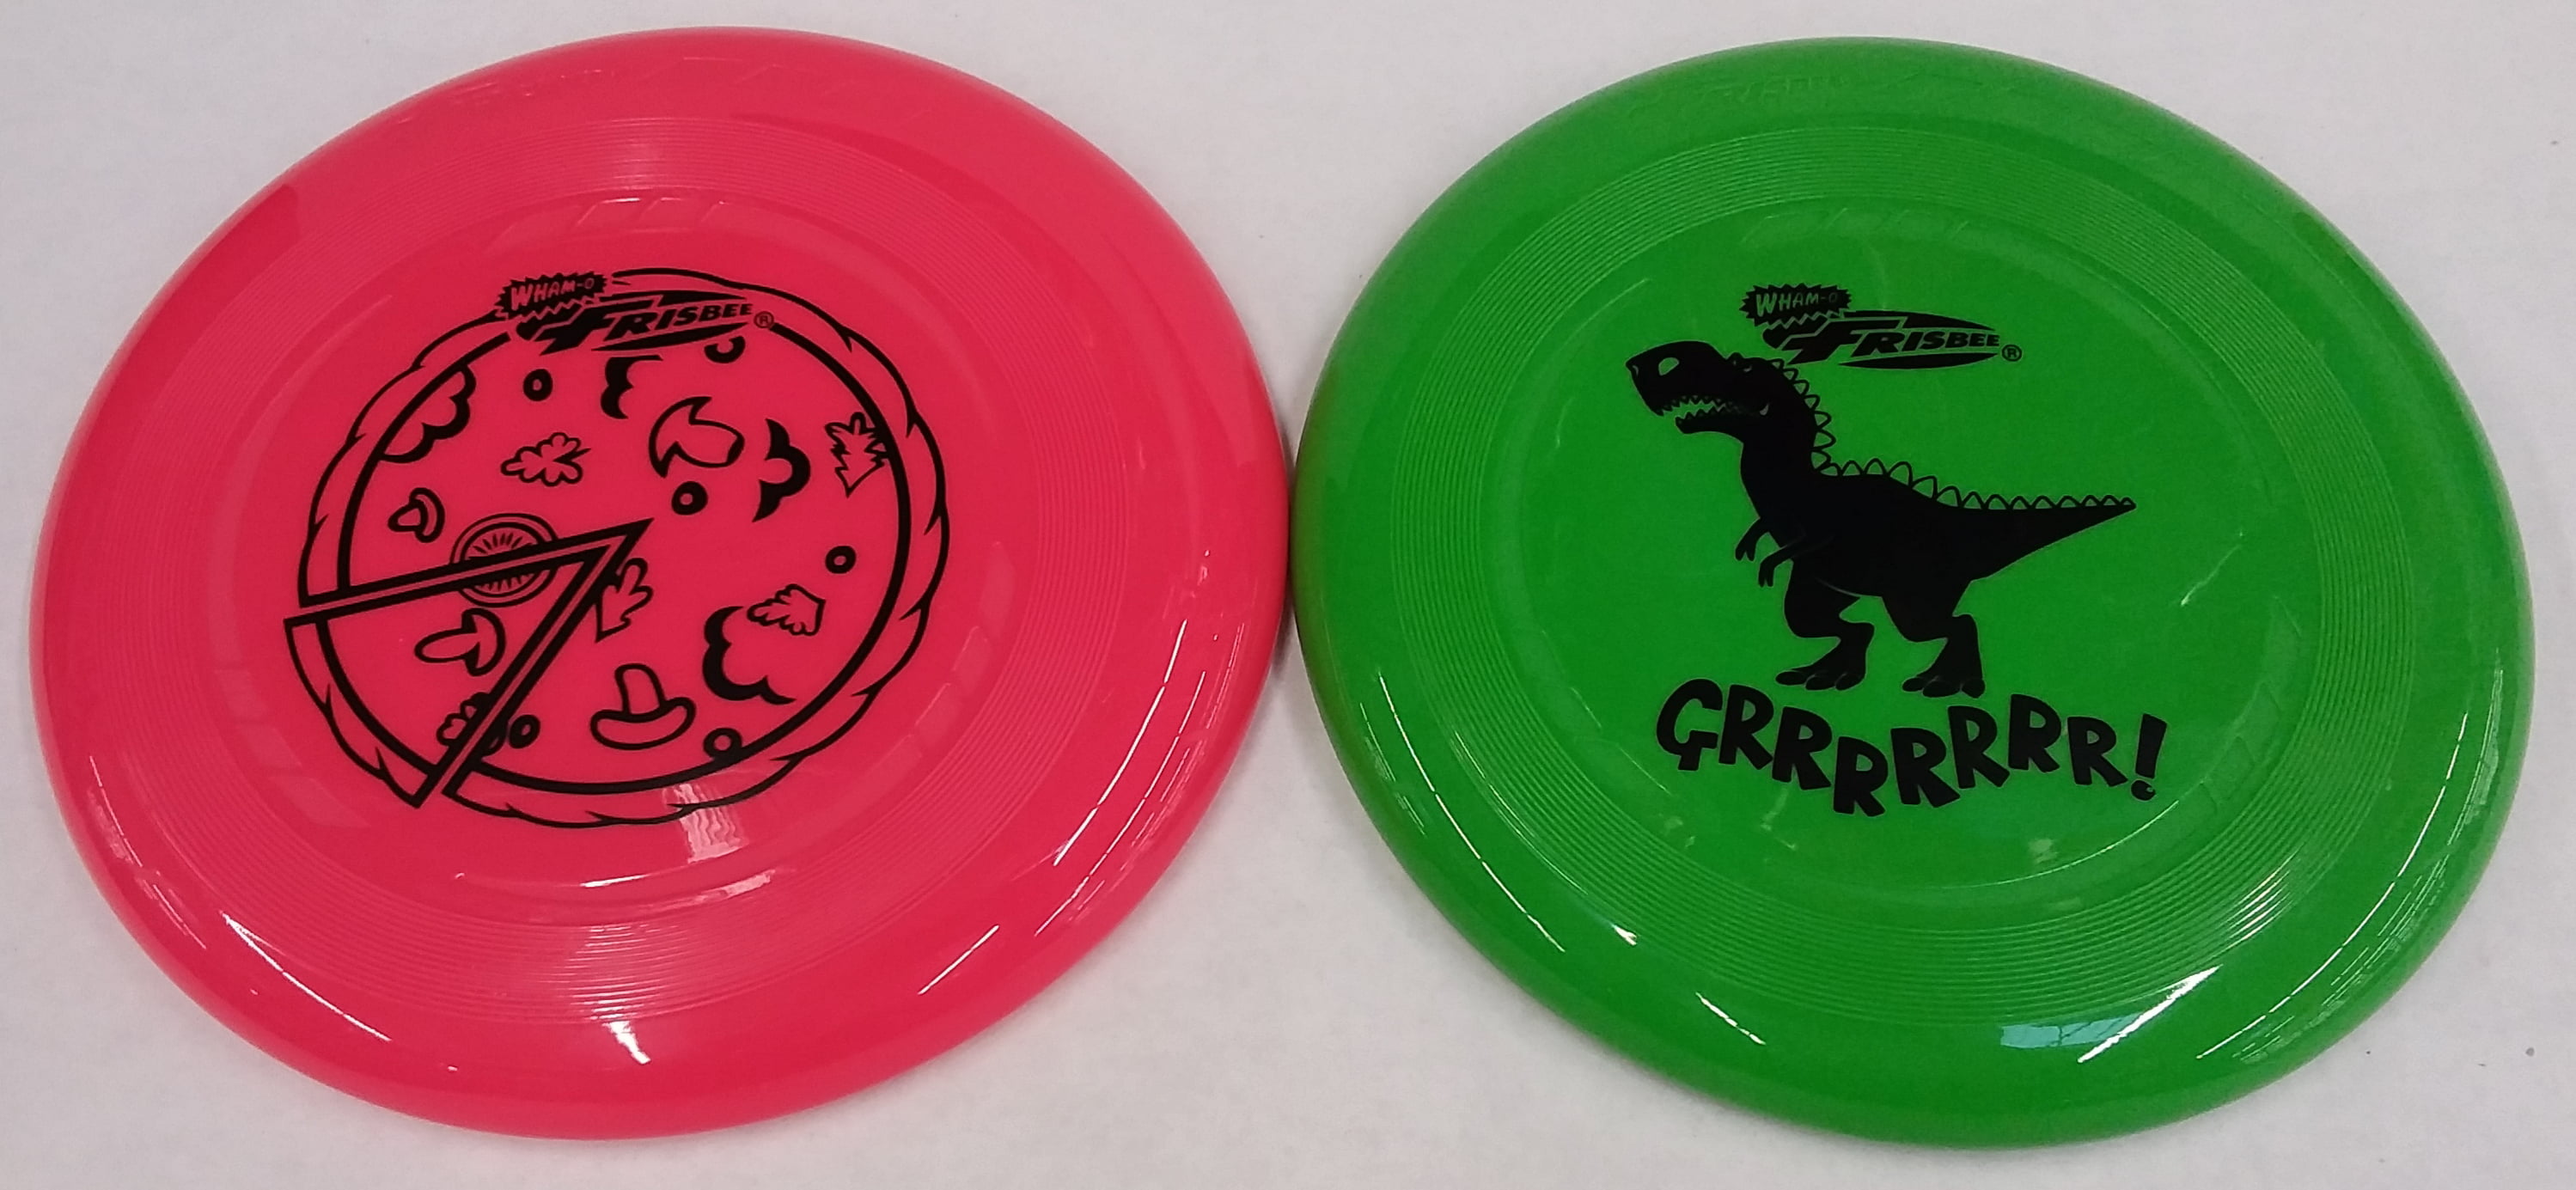 Details about   NEW Green Wham-o Frisbee 